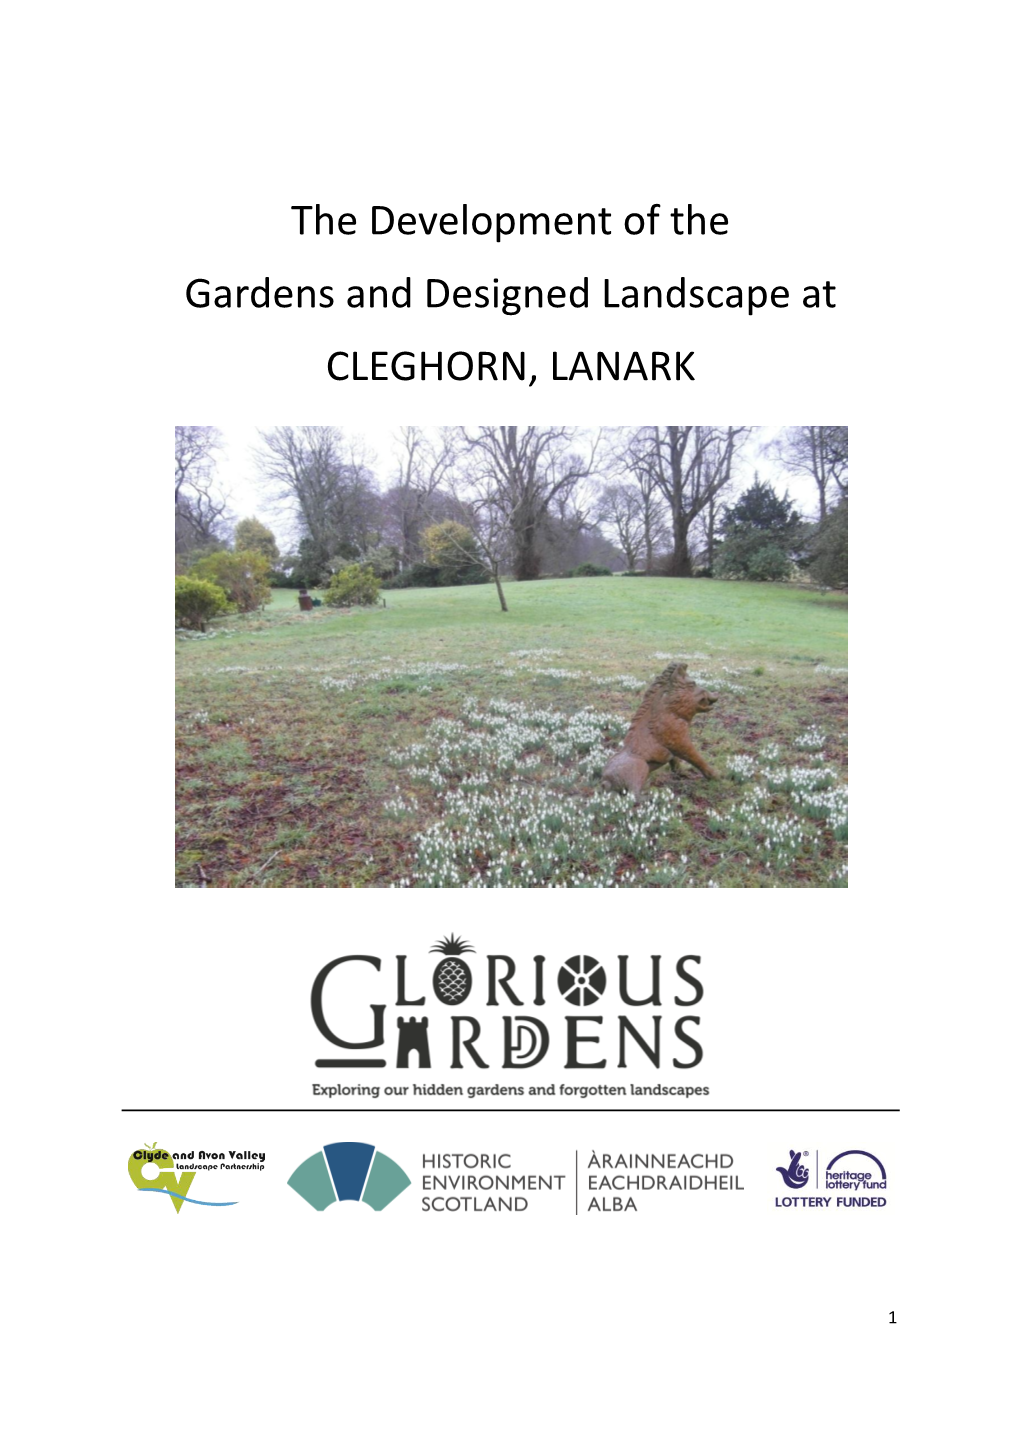 The Development of the Gardens and Designed Landscape at CLEGHORN, LANARK